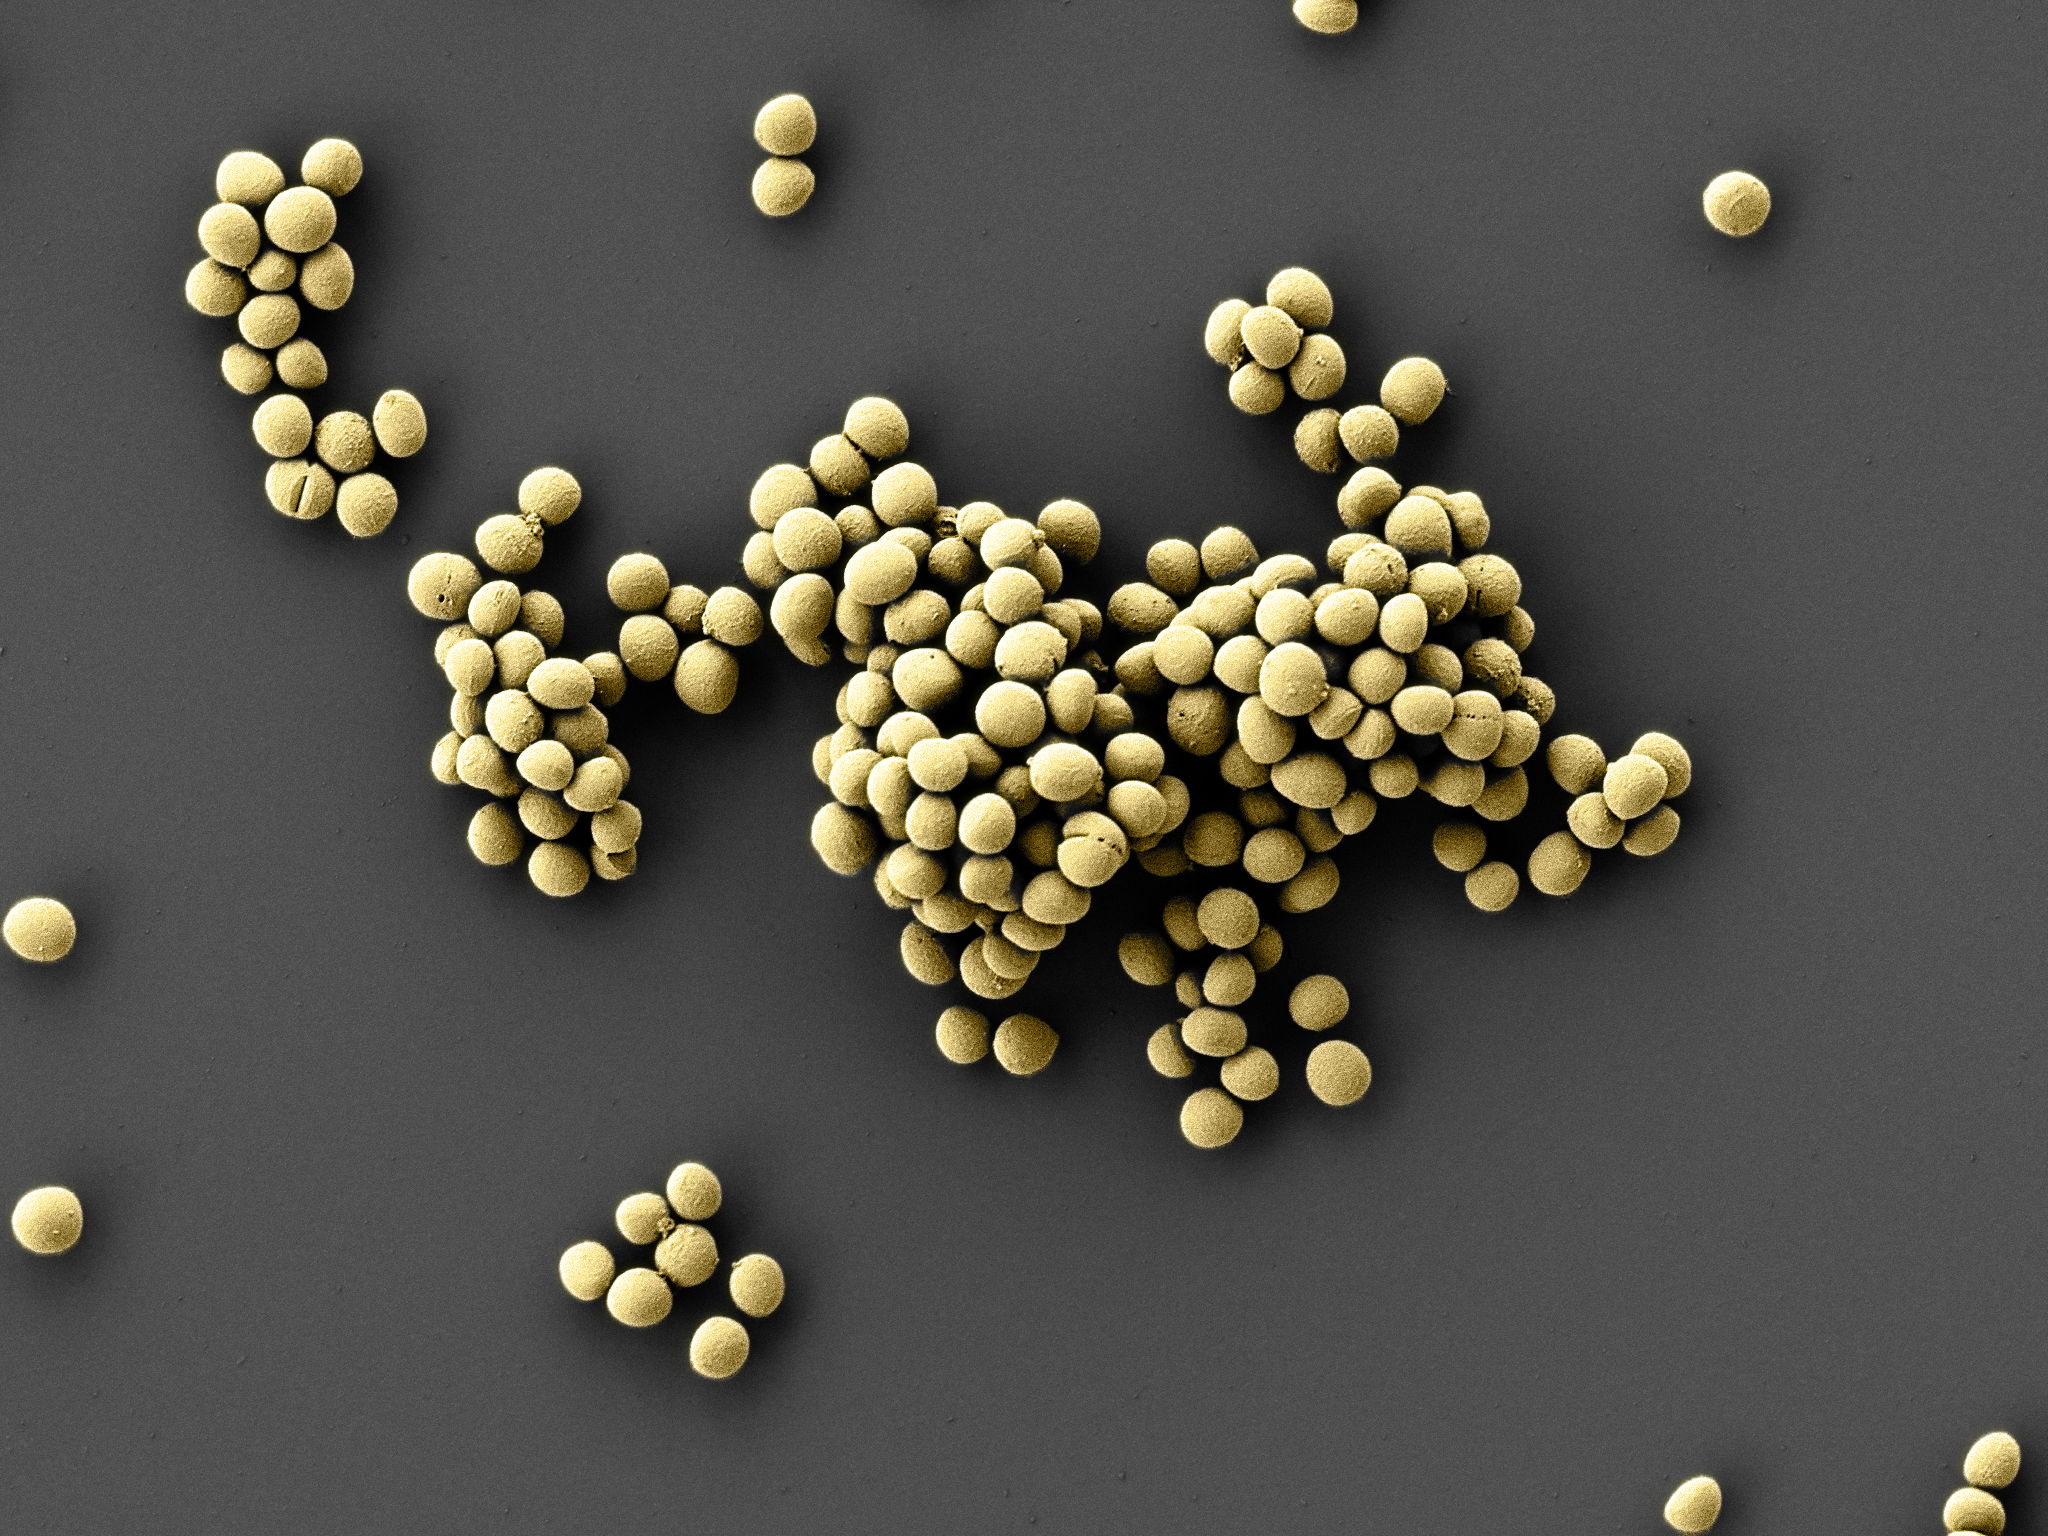 Colonies of the germ as beige-coloured spheres on a dark grey background.